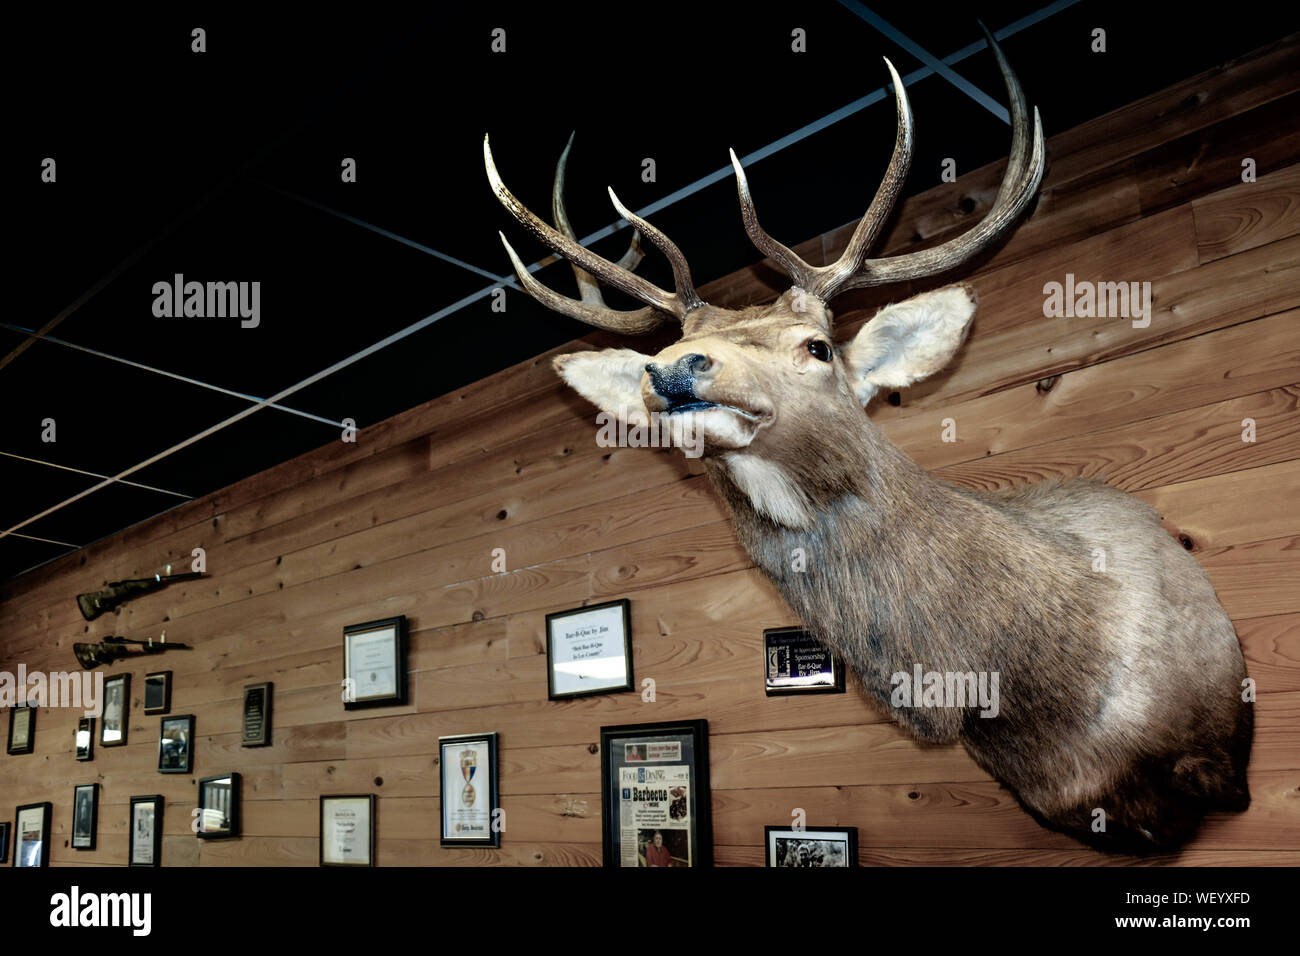 An old style interior for Bar-B-Q by Jim restaurant, with deer head wall mount as decor on wood paneled walls, with photographs and hunting rifles Stock Photo